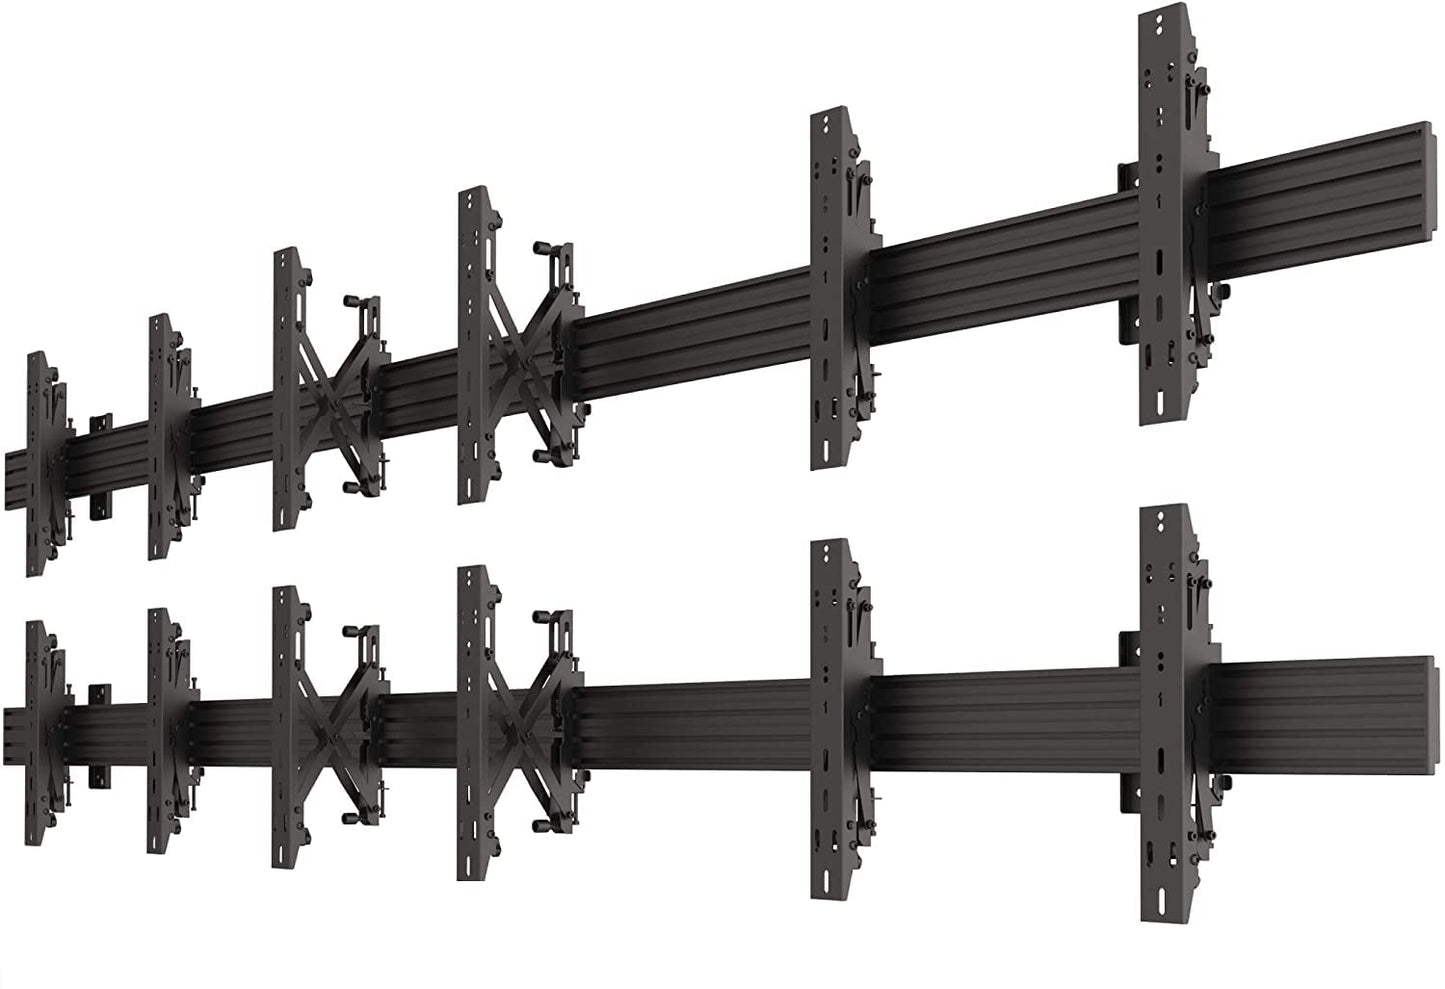 2x3 Video Wall Rail Mounting System - Pop out brackets with Microadjustments